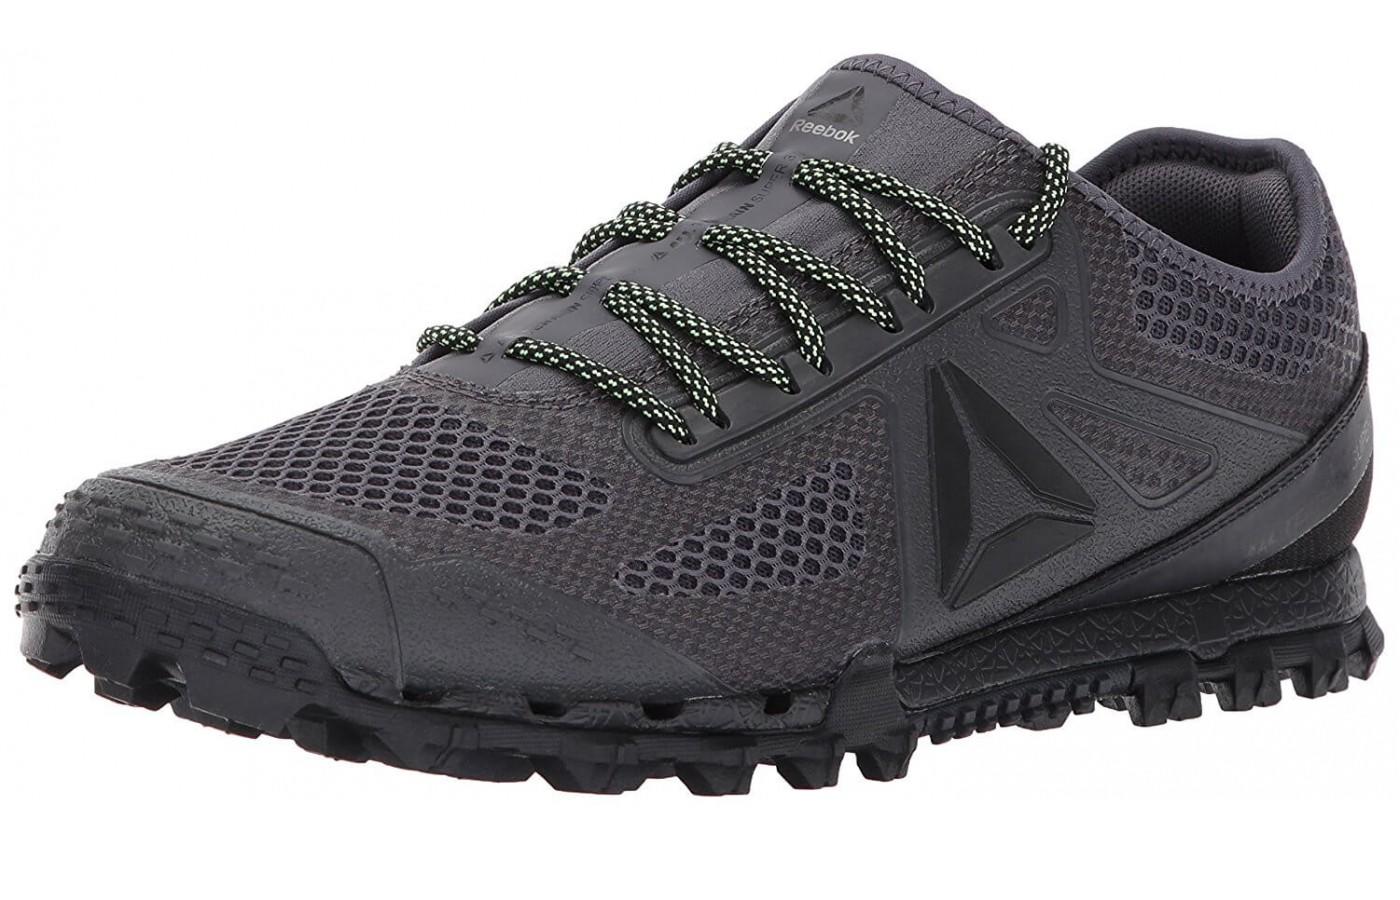 The Reebok All Terrain Super 3.0 is designed for obstacle race running.